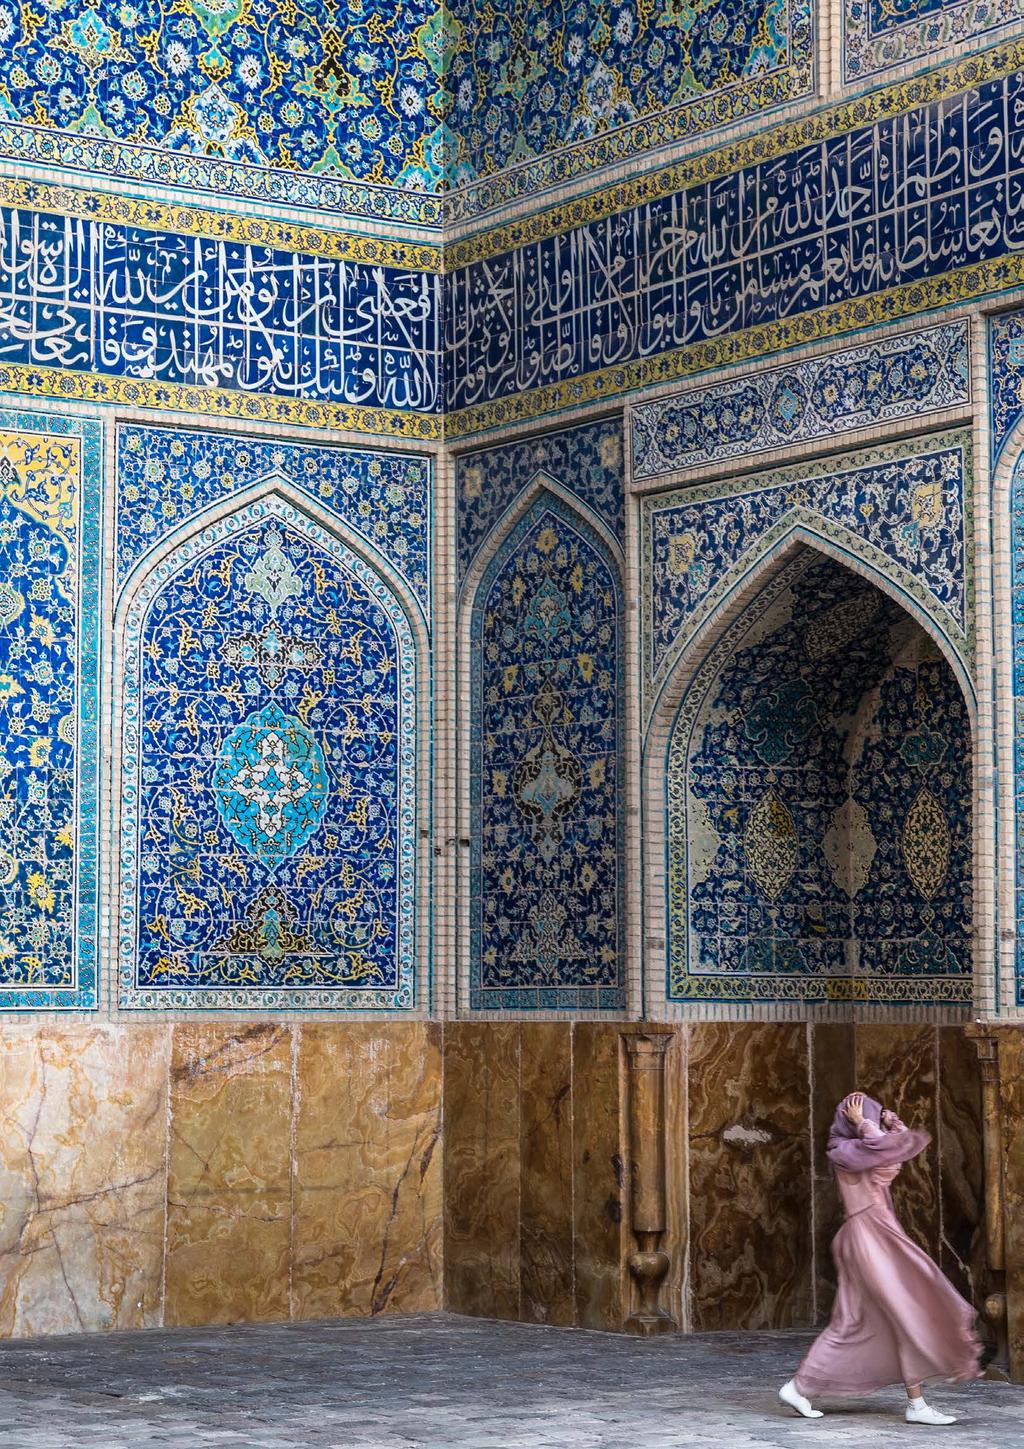 Iran abounds in the kind of experiences we love: fabulously exotic buildings, a wealth of evocative ancient sites spanning 4,000 years of civilization, sophisticated crafts traditions, and